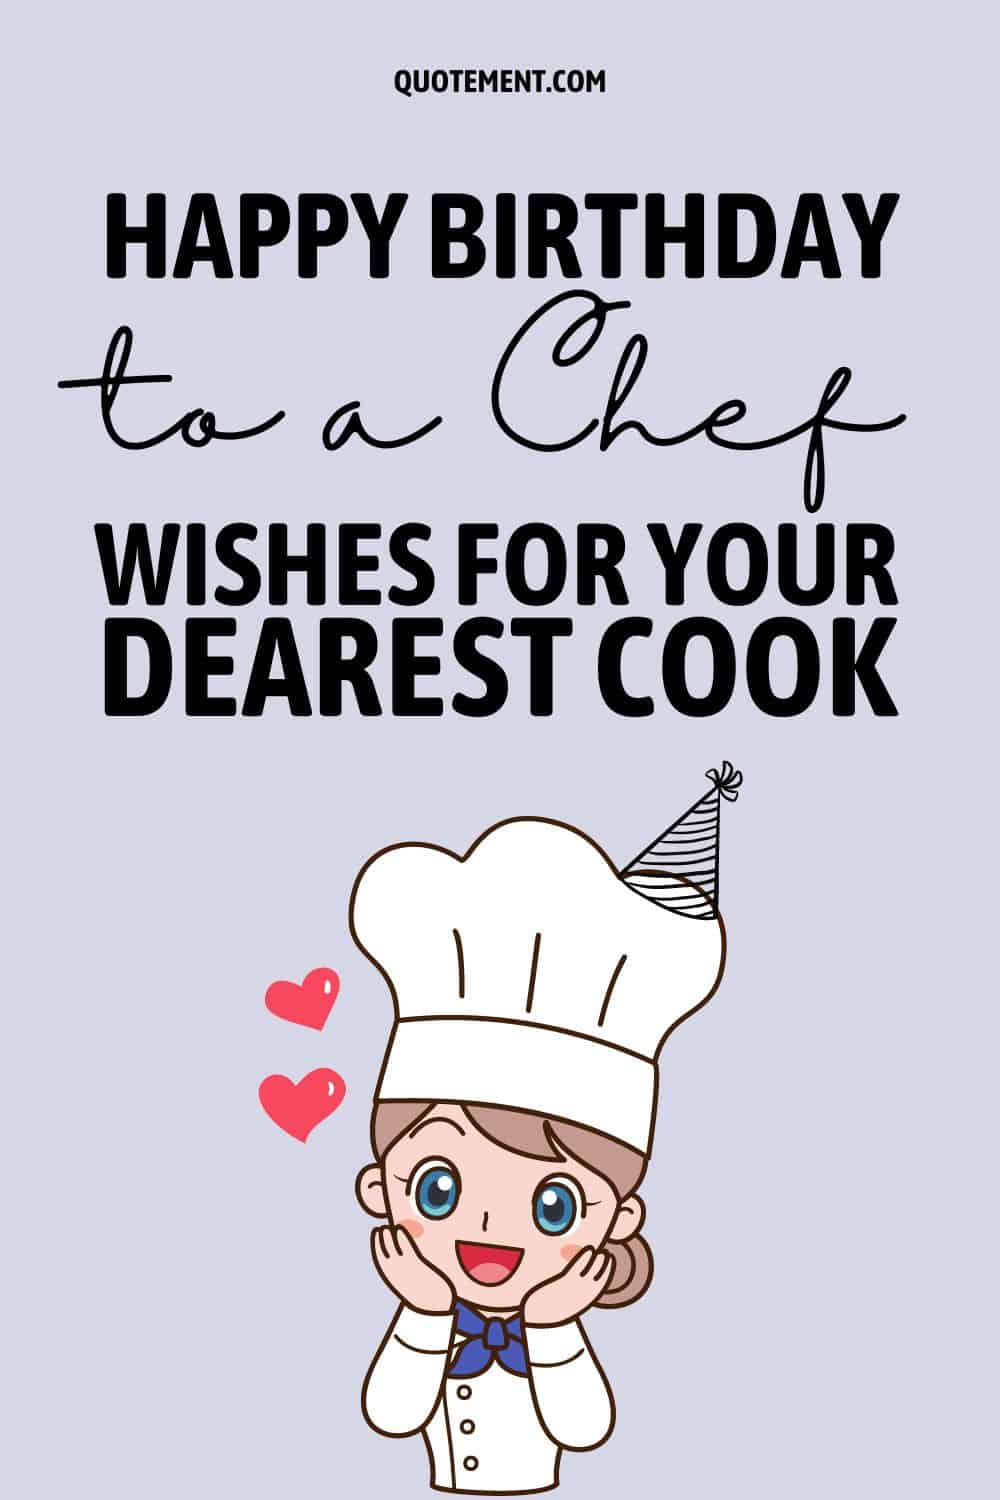 40 Happy Birthday To A Chef Wishes For Your Dearest Cook
